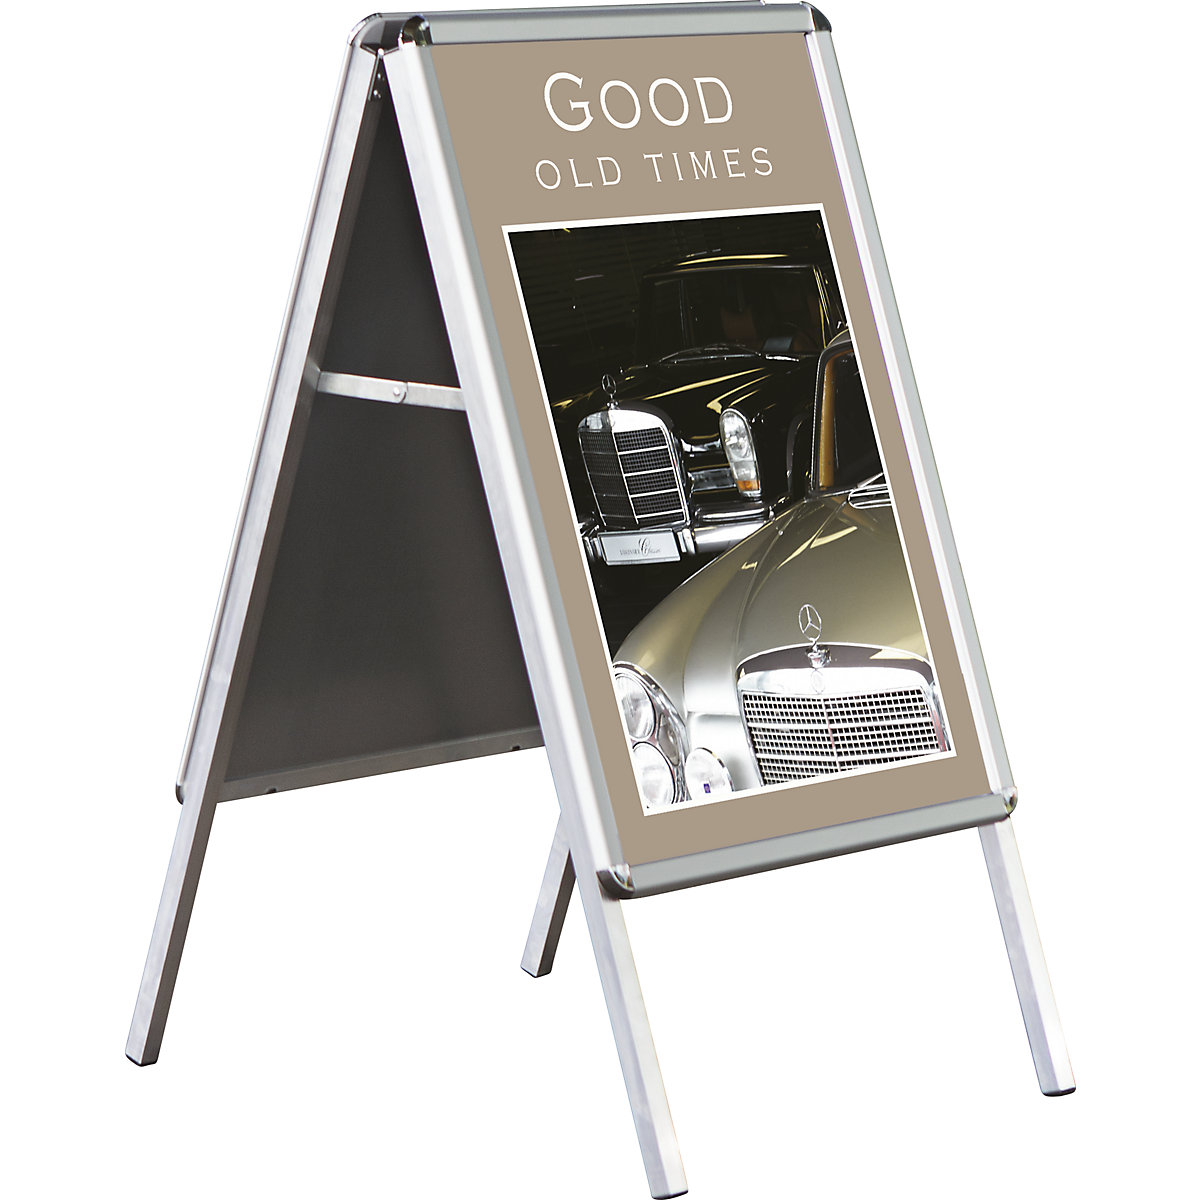 OUTDOOR folding advertising stand, HxWxD 1120 x 639 x 744 mm, 3+ items-1